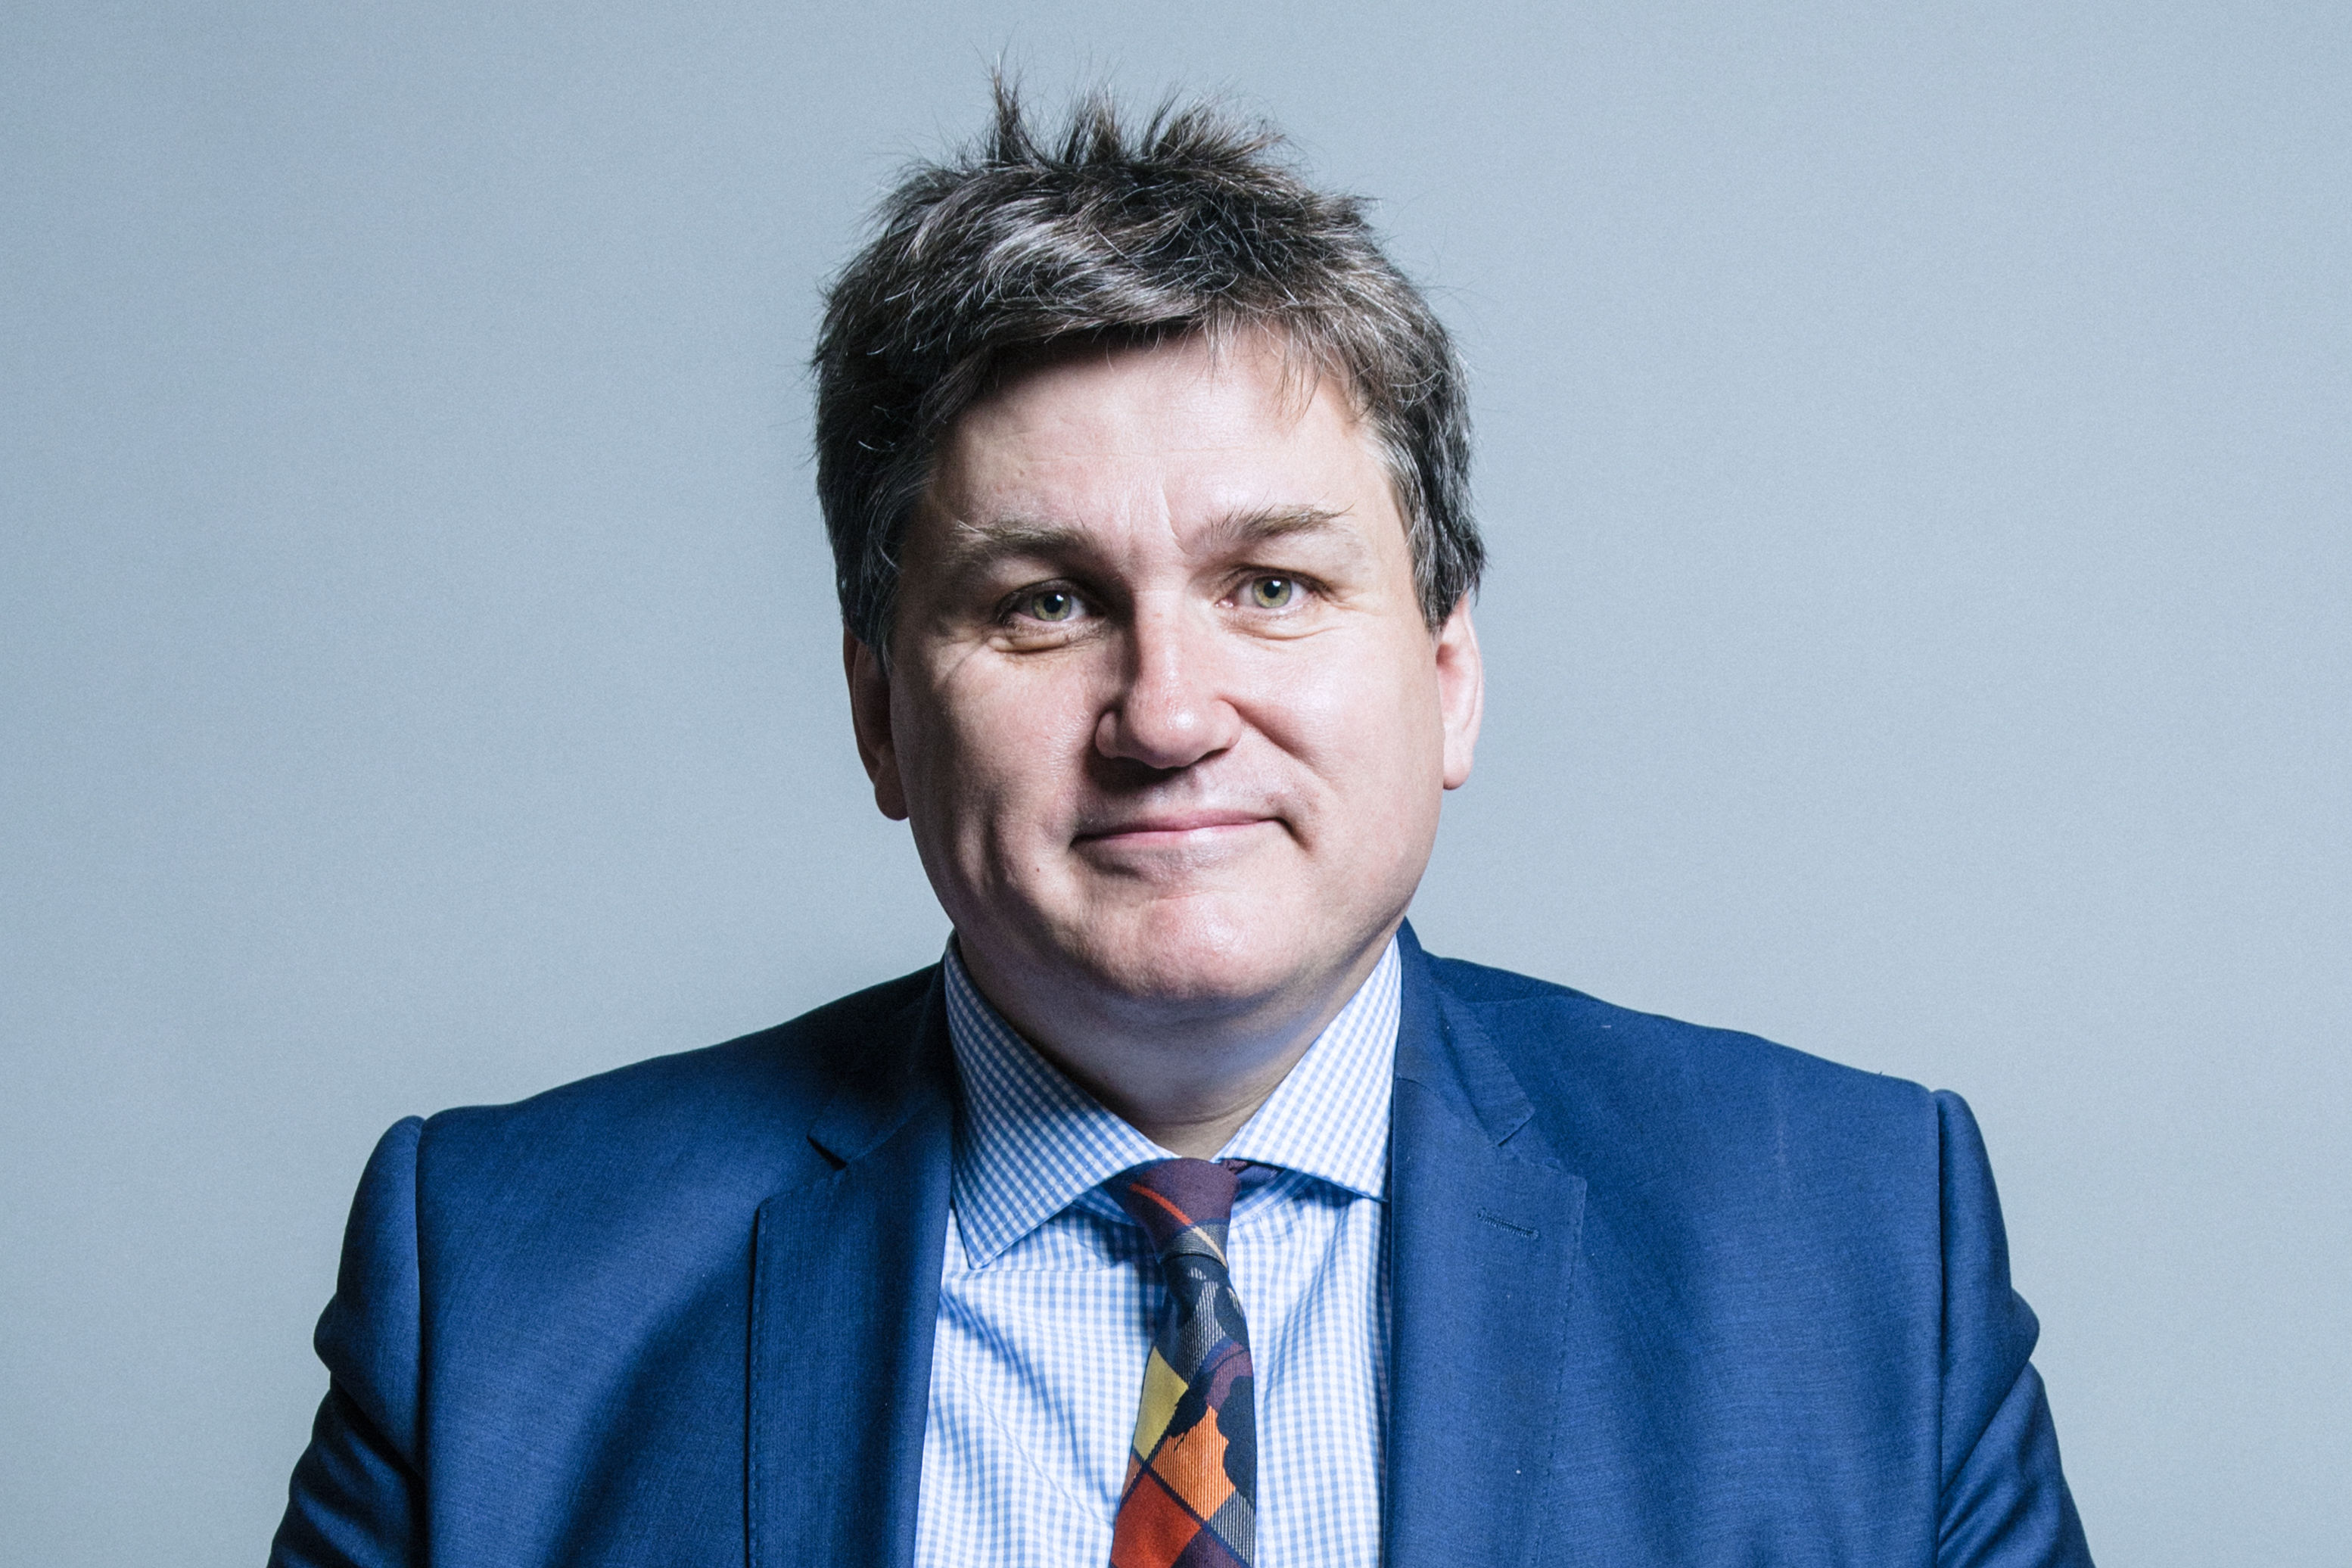 Kit Malthouse jumps out from race to replace British PM Theresa May